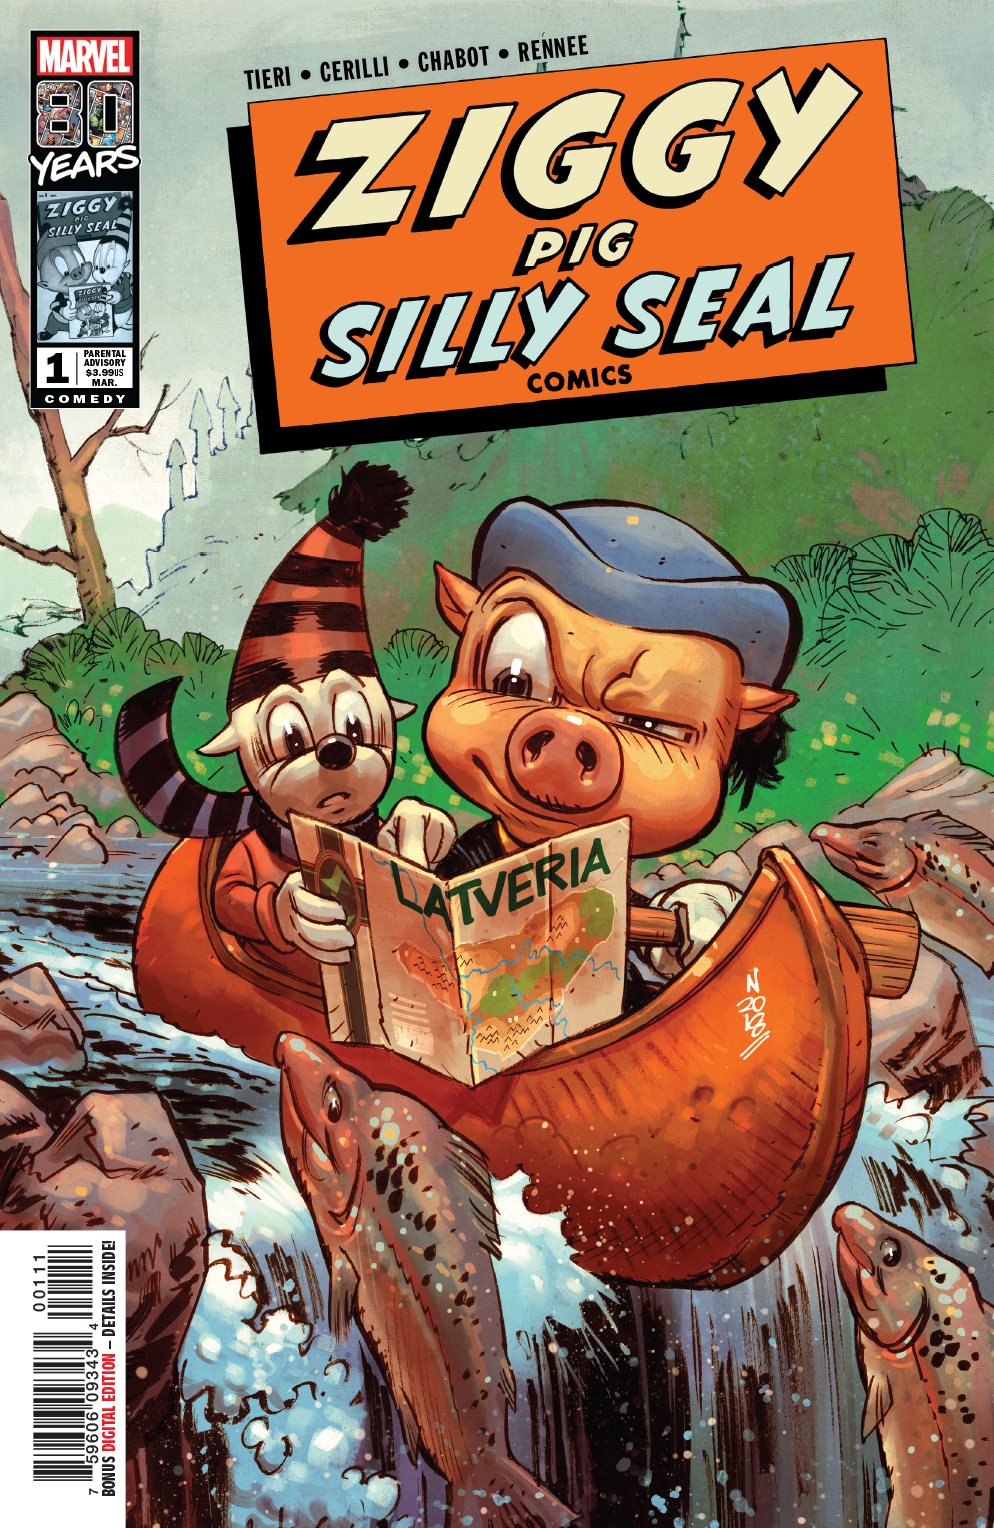 Ziggy Pig and Silly Seal no. 1 (2019 Series)